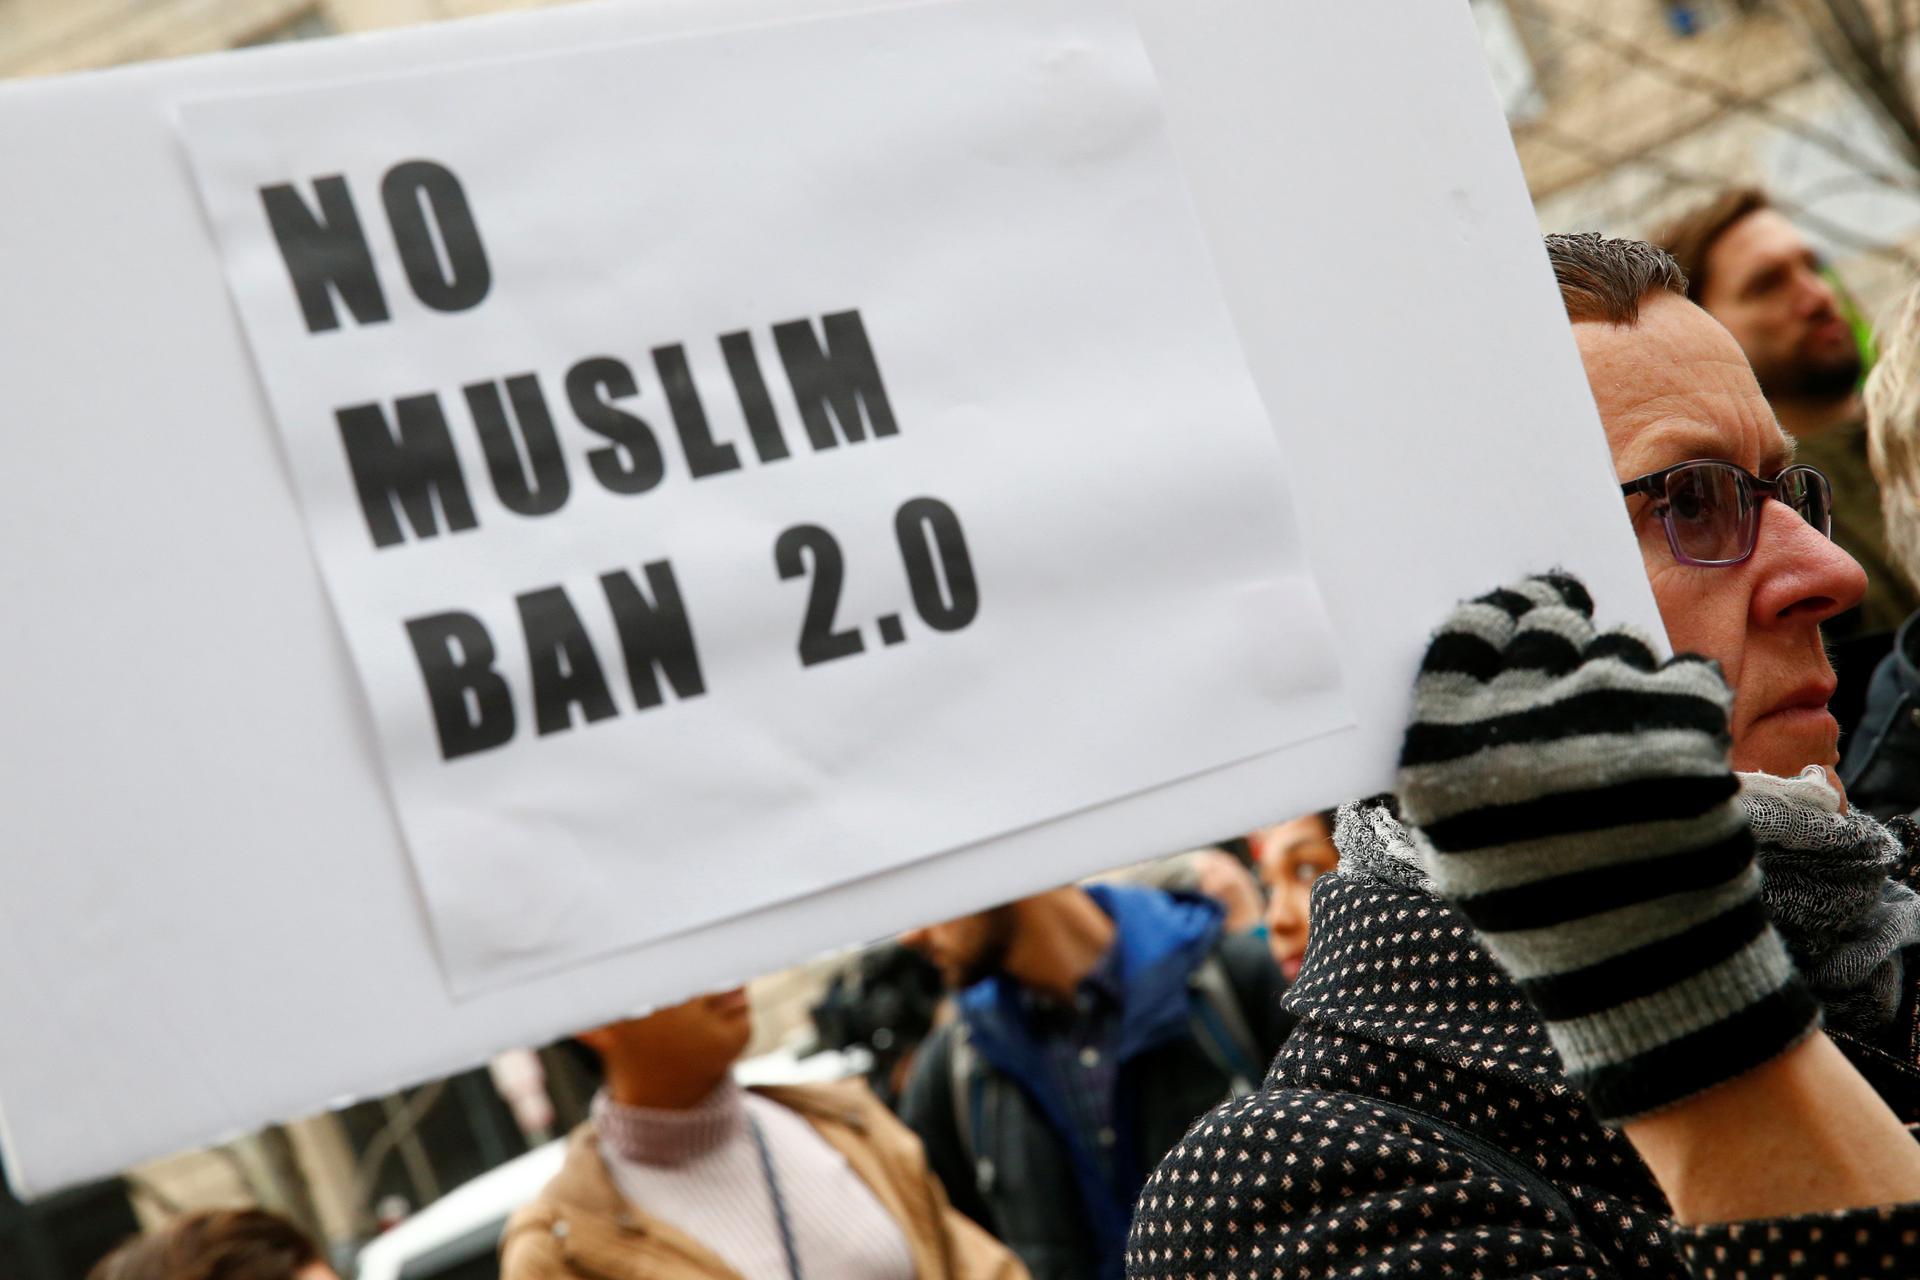 Immigration activists rally against the Trump administration's new ban against travelers from six Muslim-majority nations